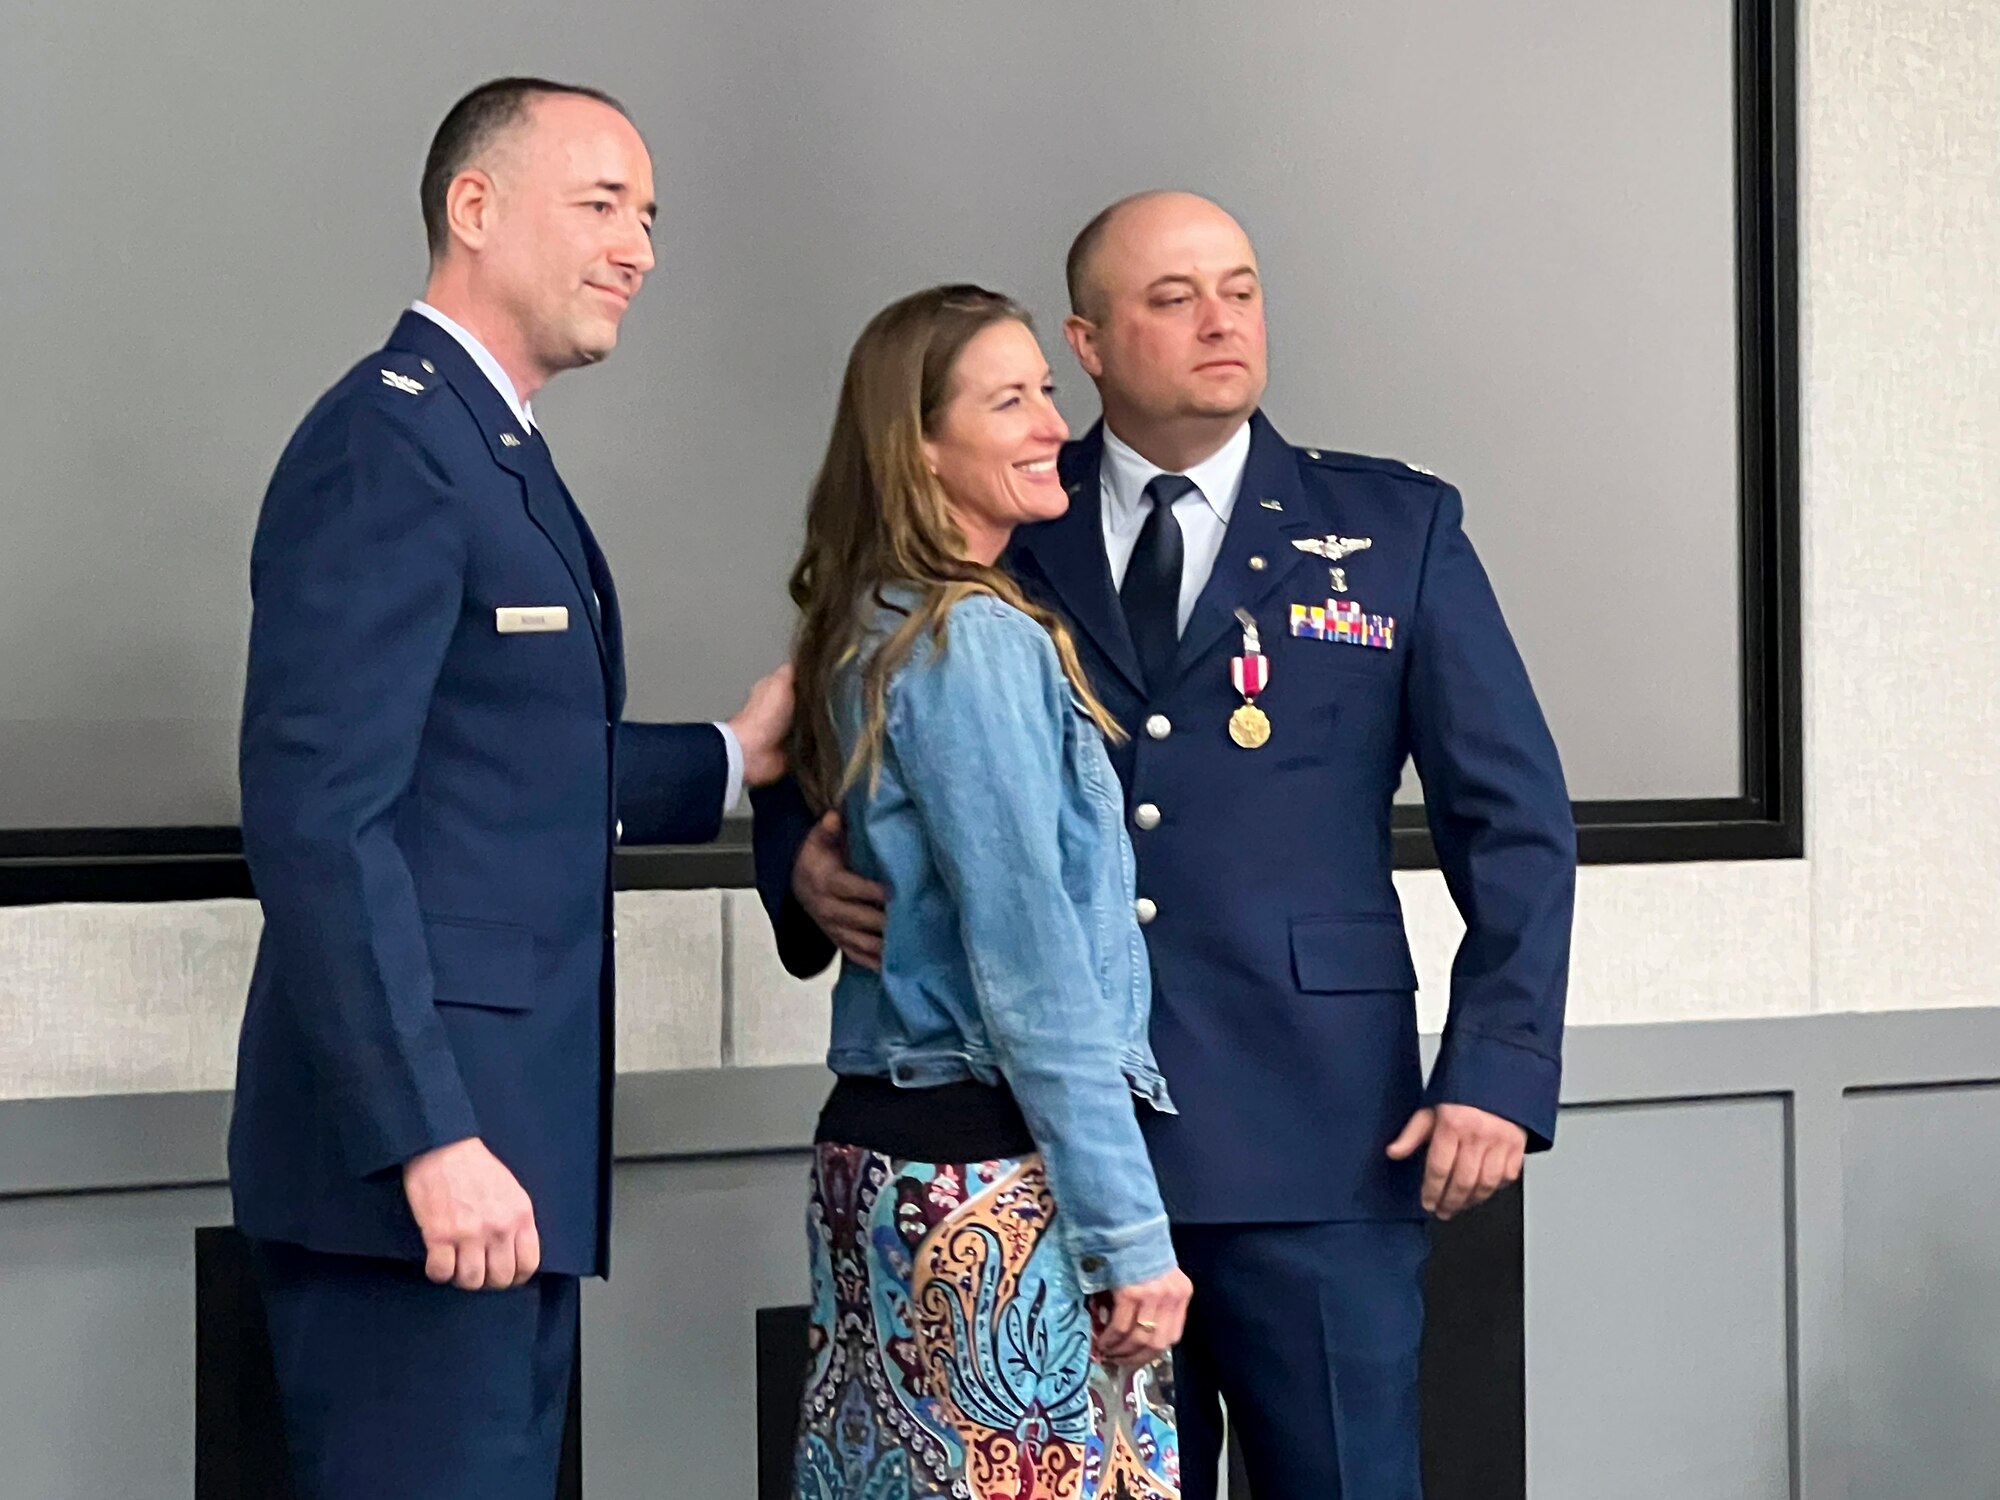 Lt. Col. Matthew Taranto, Chief Aerospace Physiologist, U.S. Air Force Test Pilot School takes a picture with his wife after conducting his "fini-flight" before retirement March 31st. (Photo courtesy of Staff Sgt. Elizabeth Taranto)